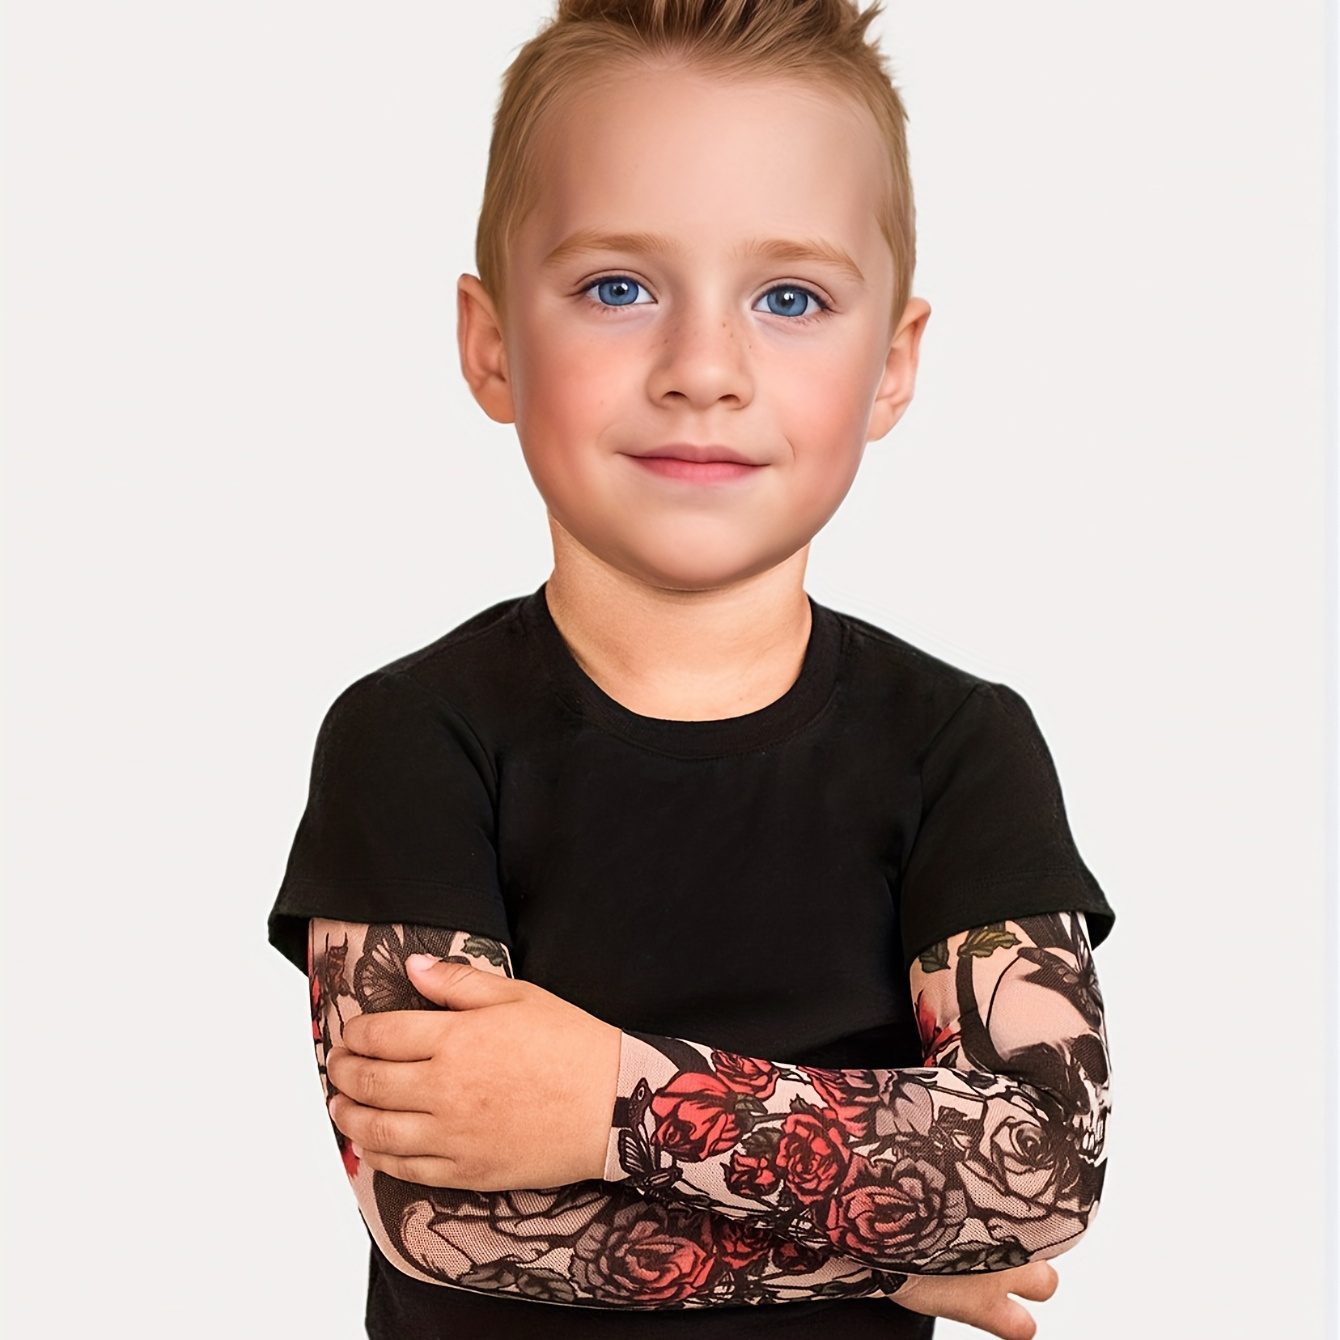 

Stylish Faux Two-piece Tattoo Pattern Long Sleeve T-shirt For Toddlers, Baby Boy's Top